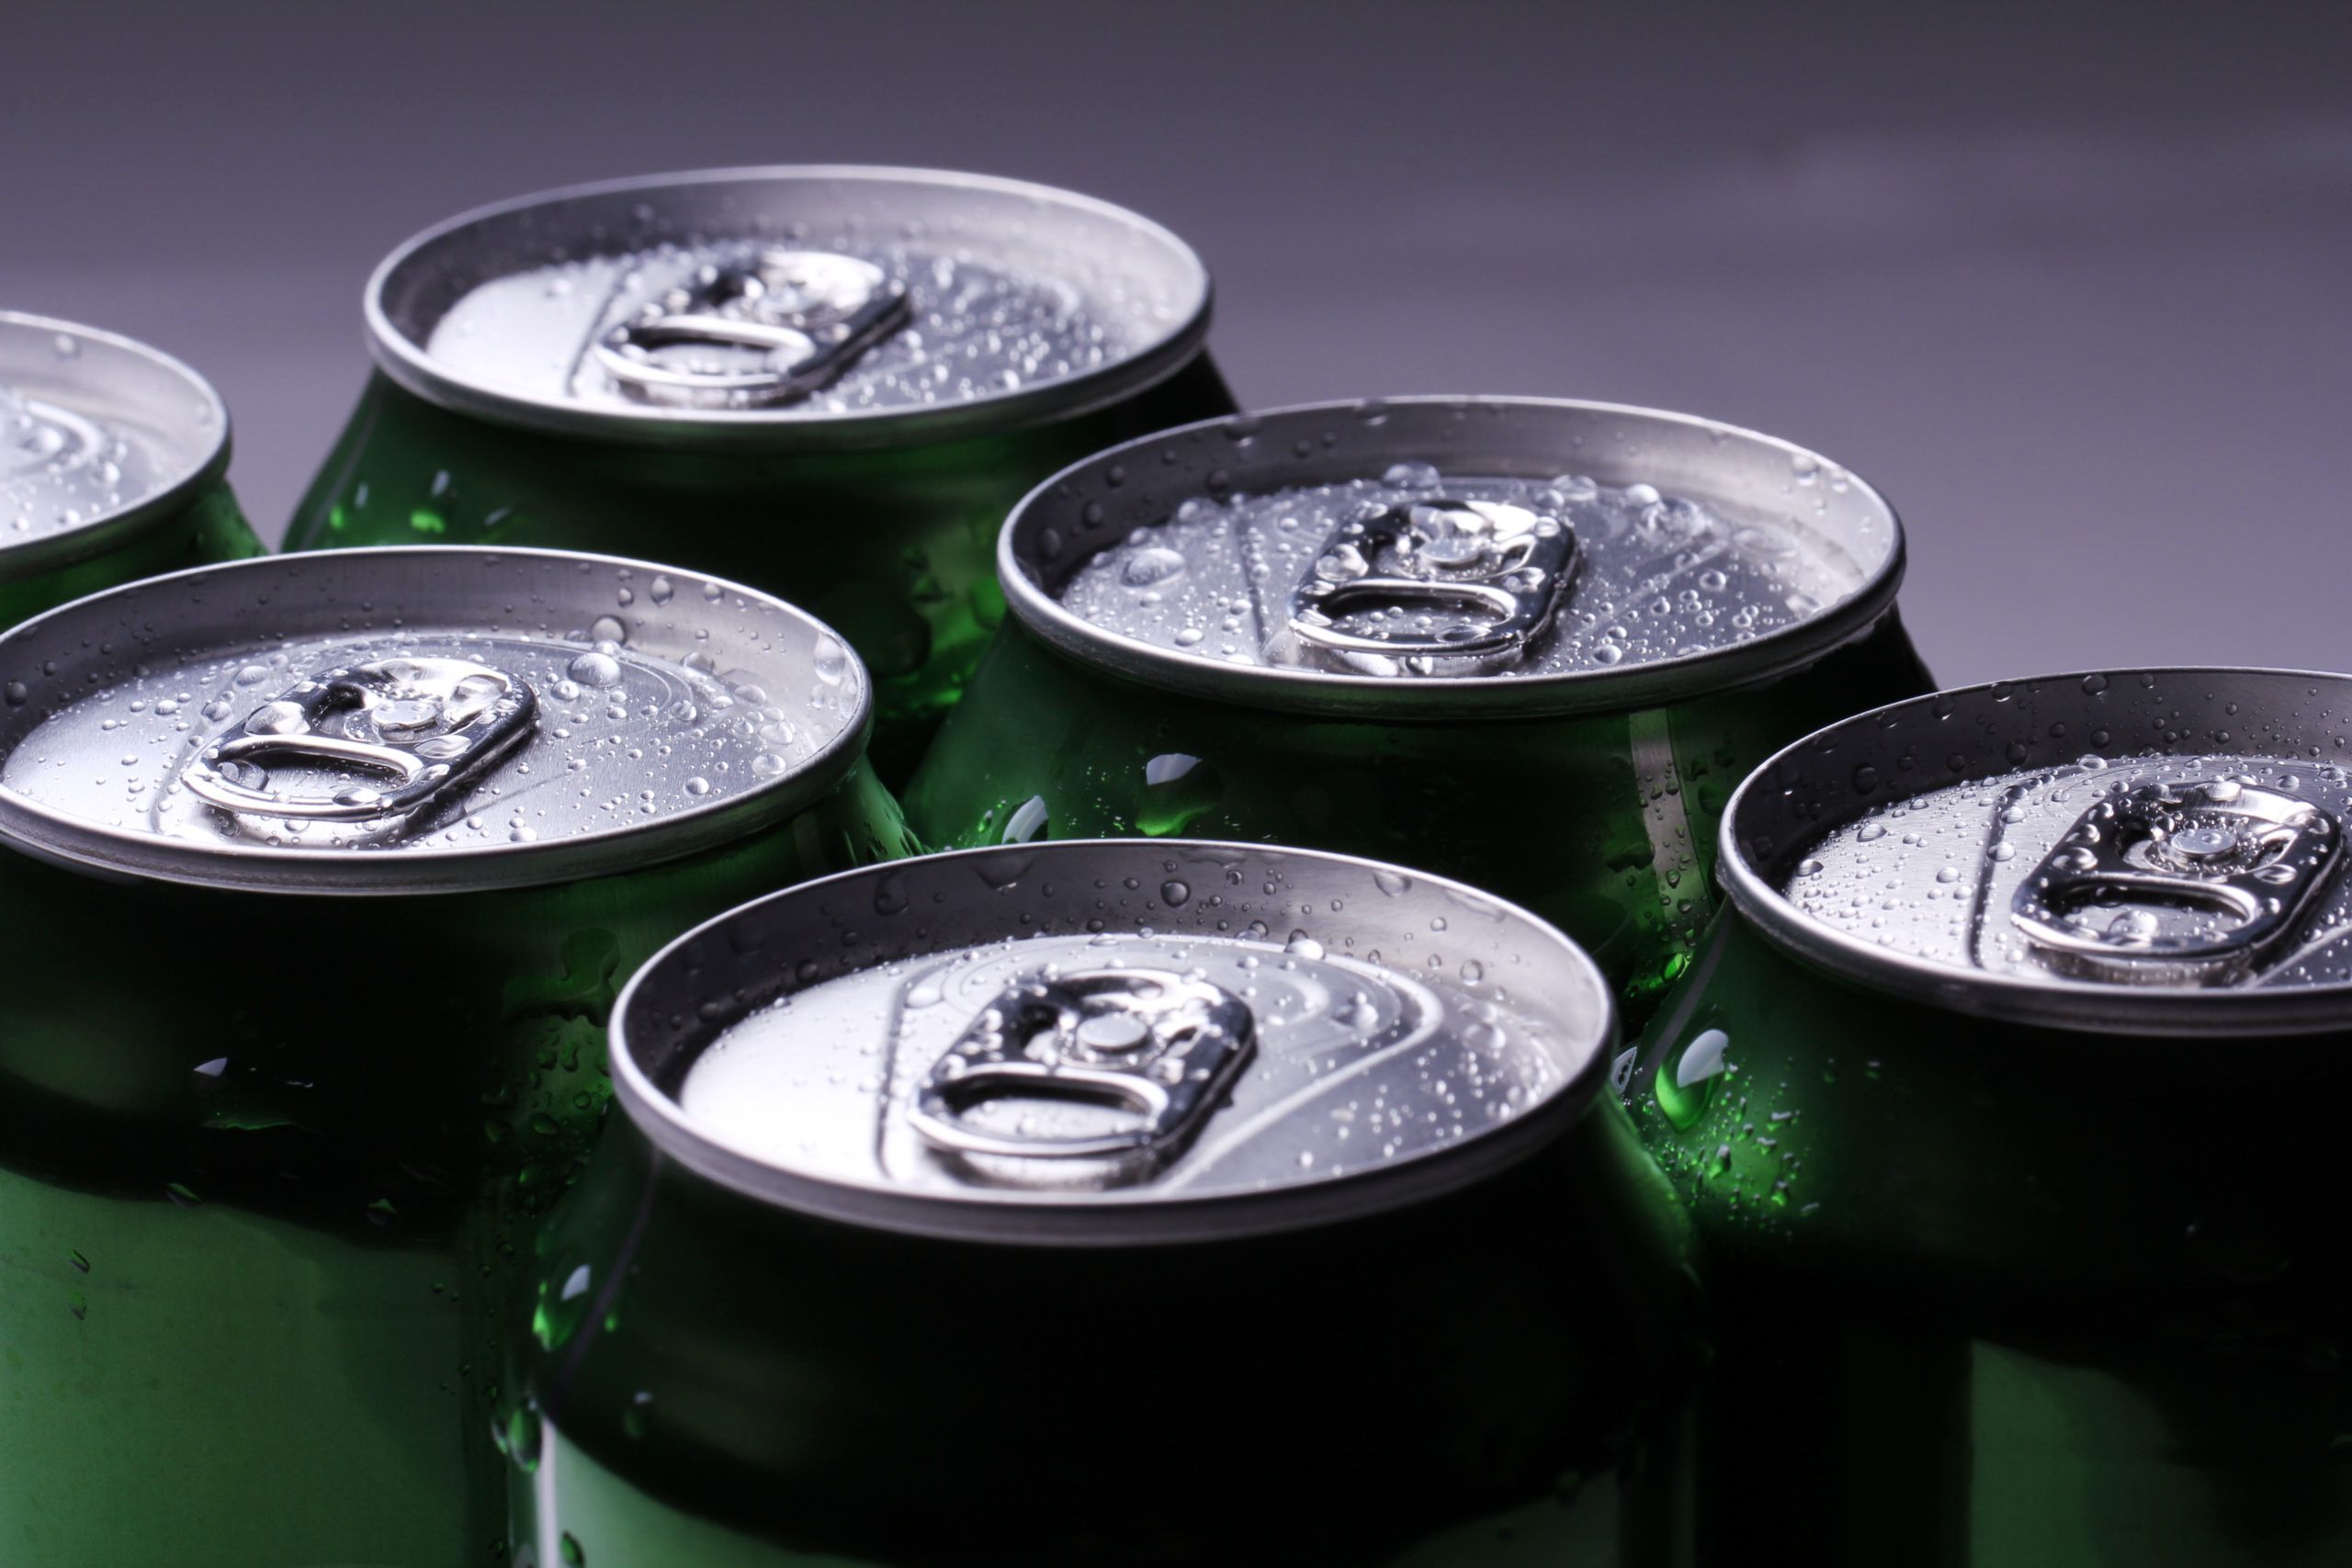 Taurin - Anti-Aging-Mittel in Energy-Drinks?